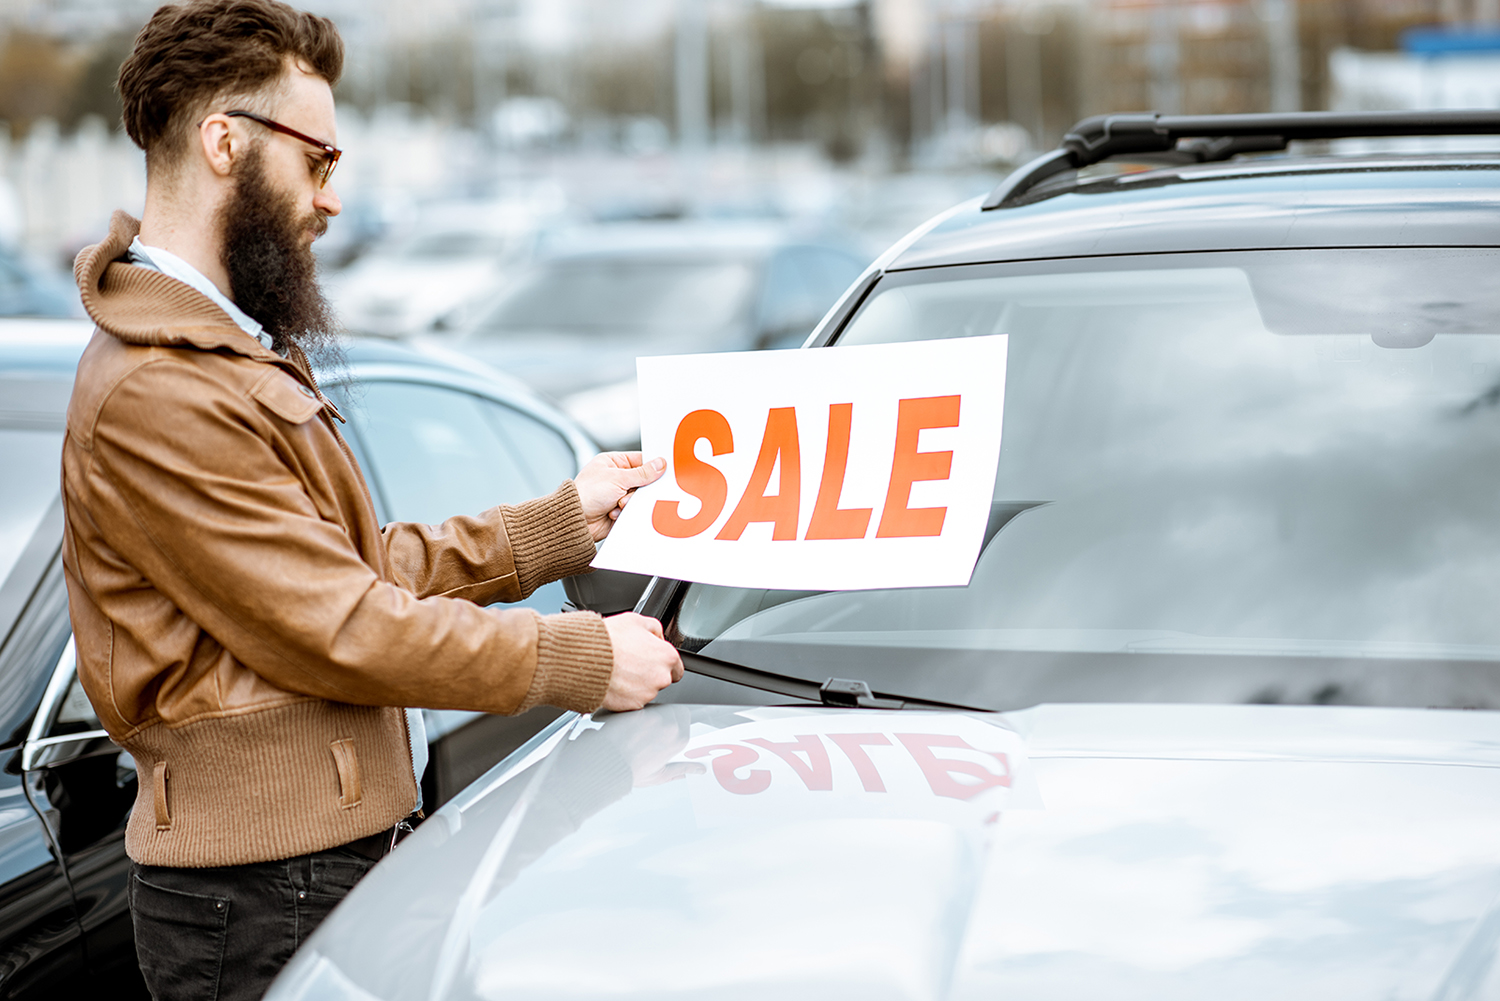 Where to Sell a Car and How?